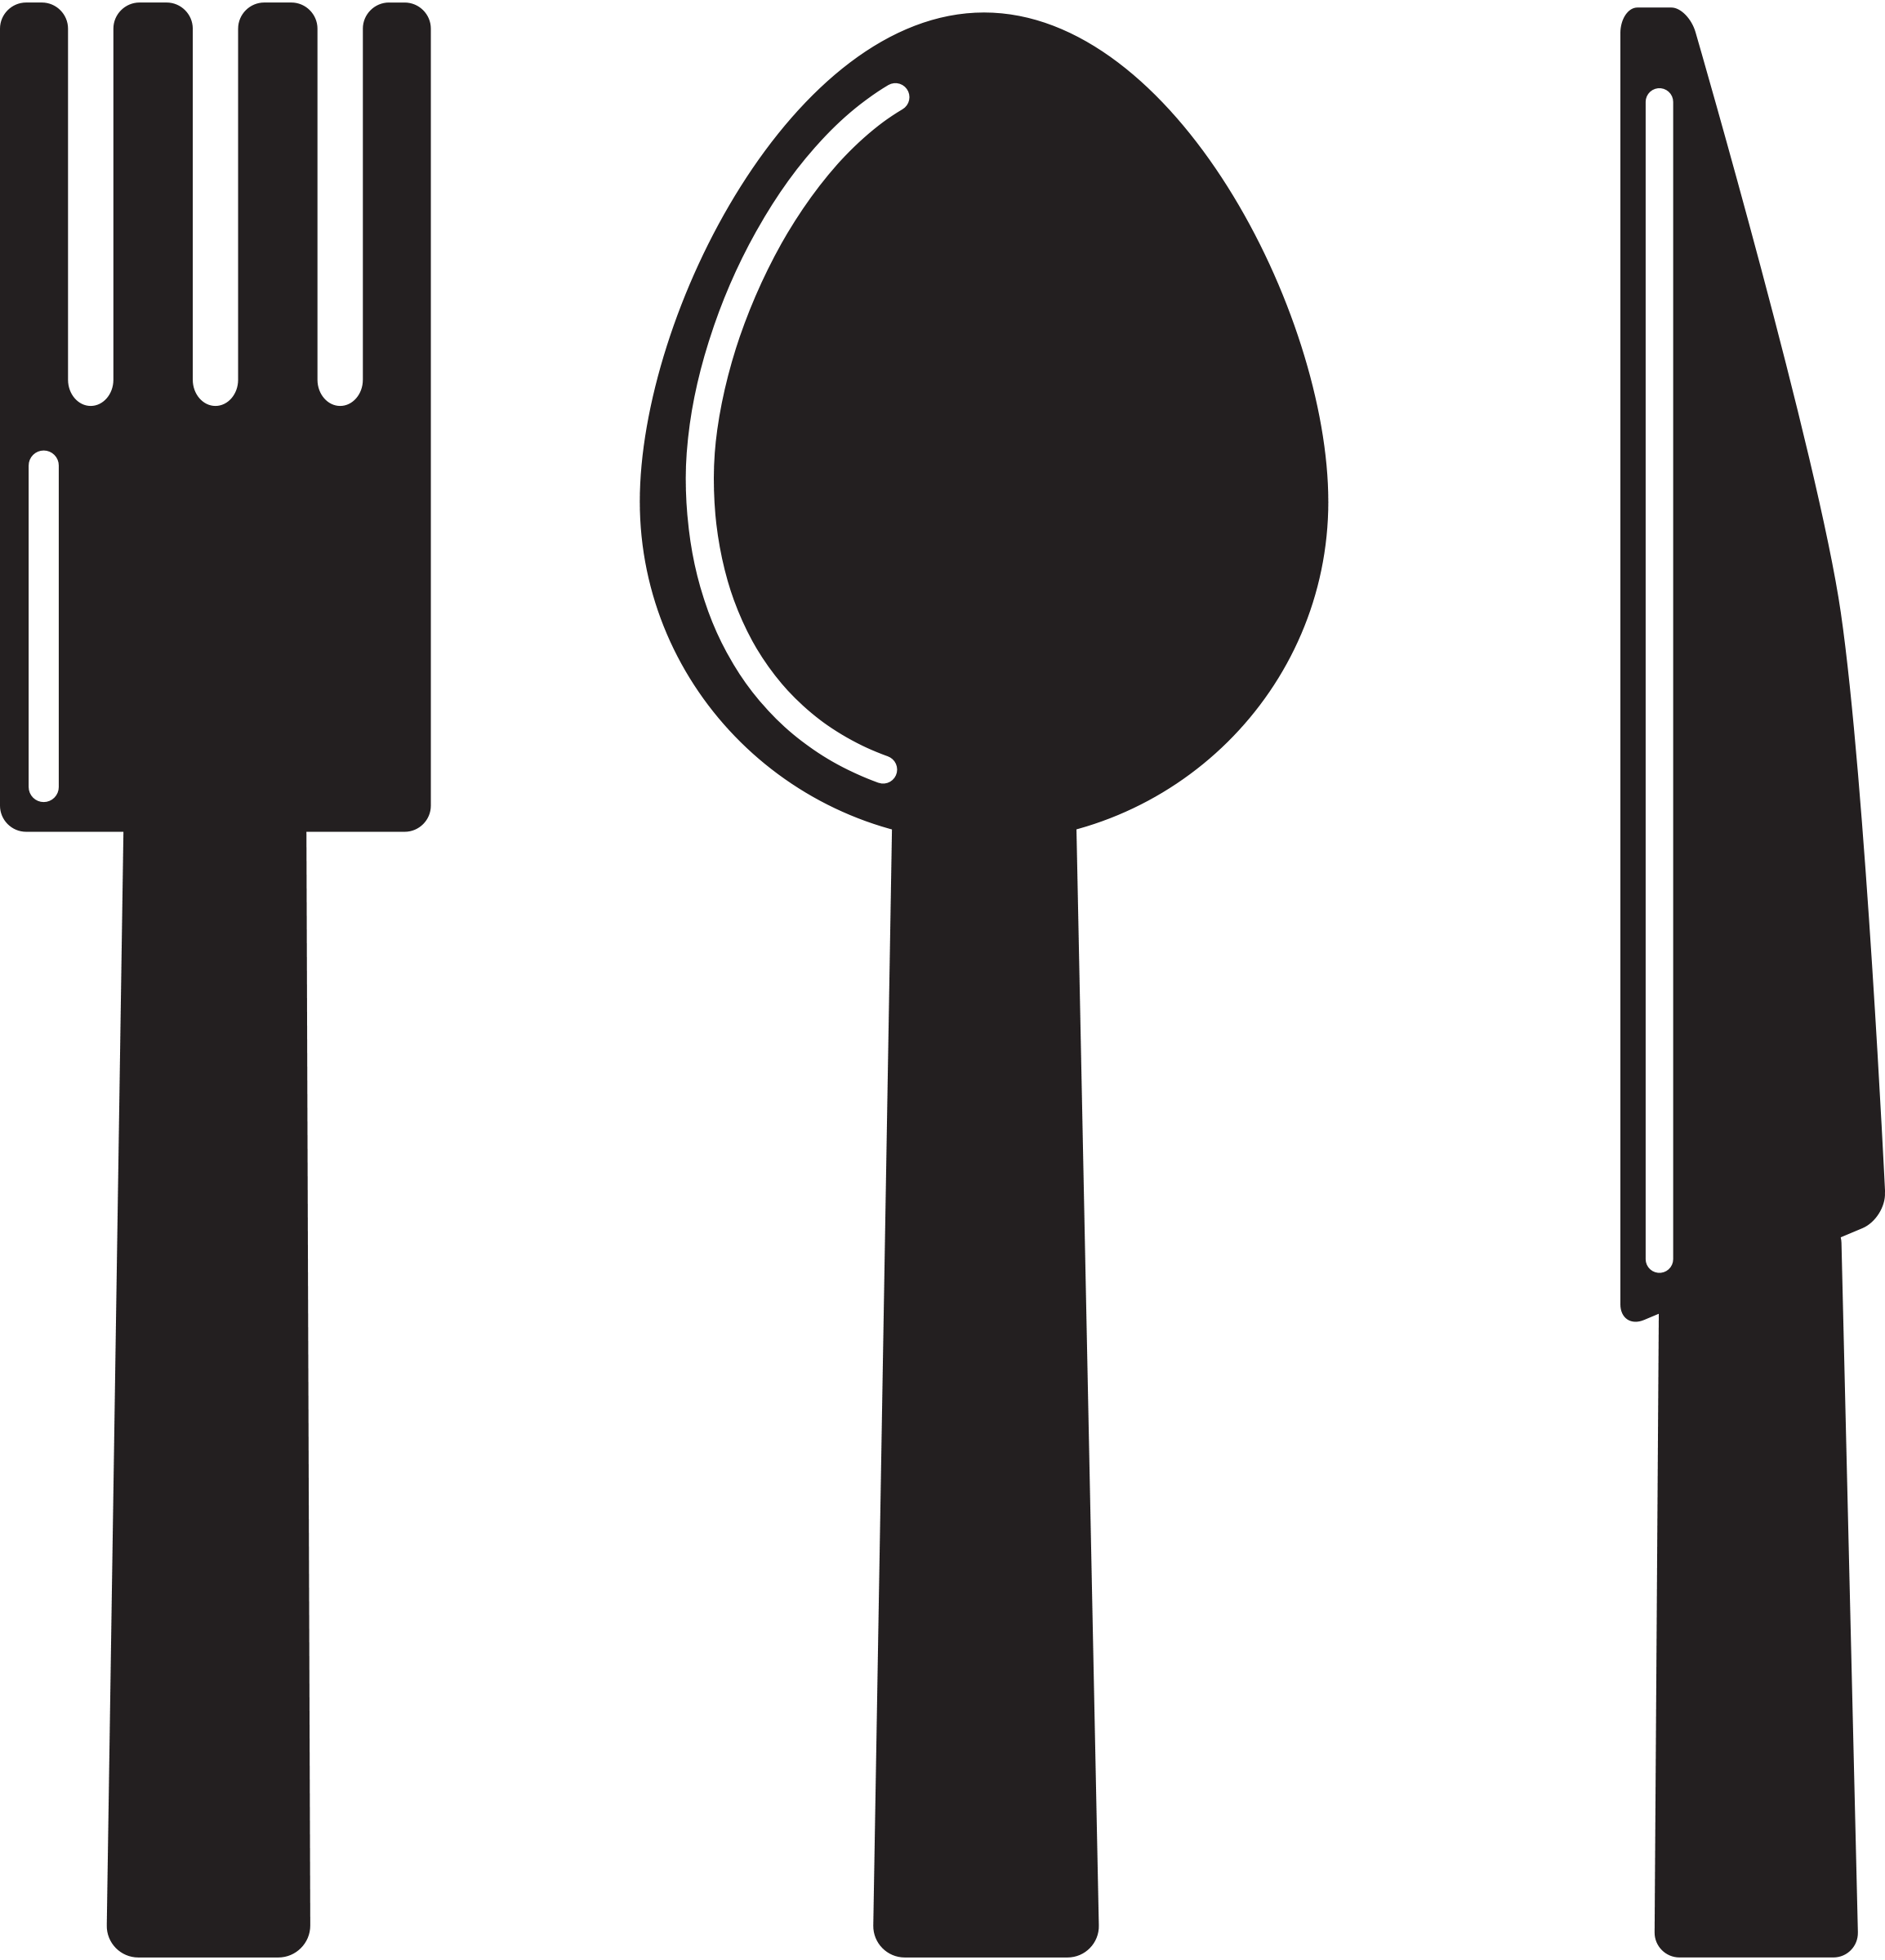 Clipart - Kitchen Icon - Knife Spoon Fork